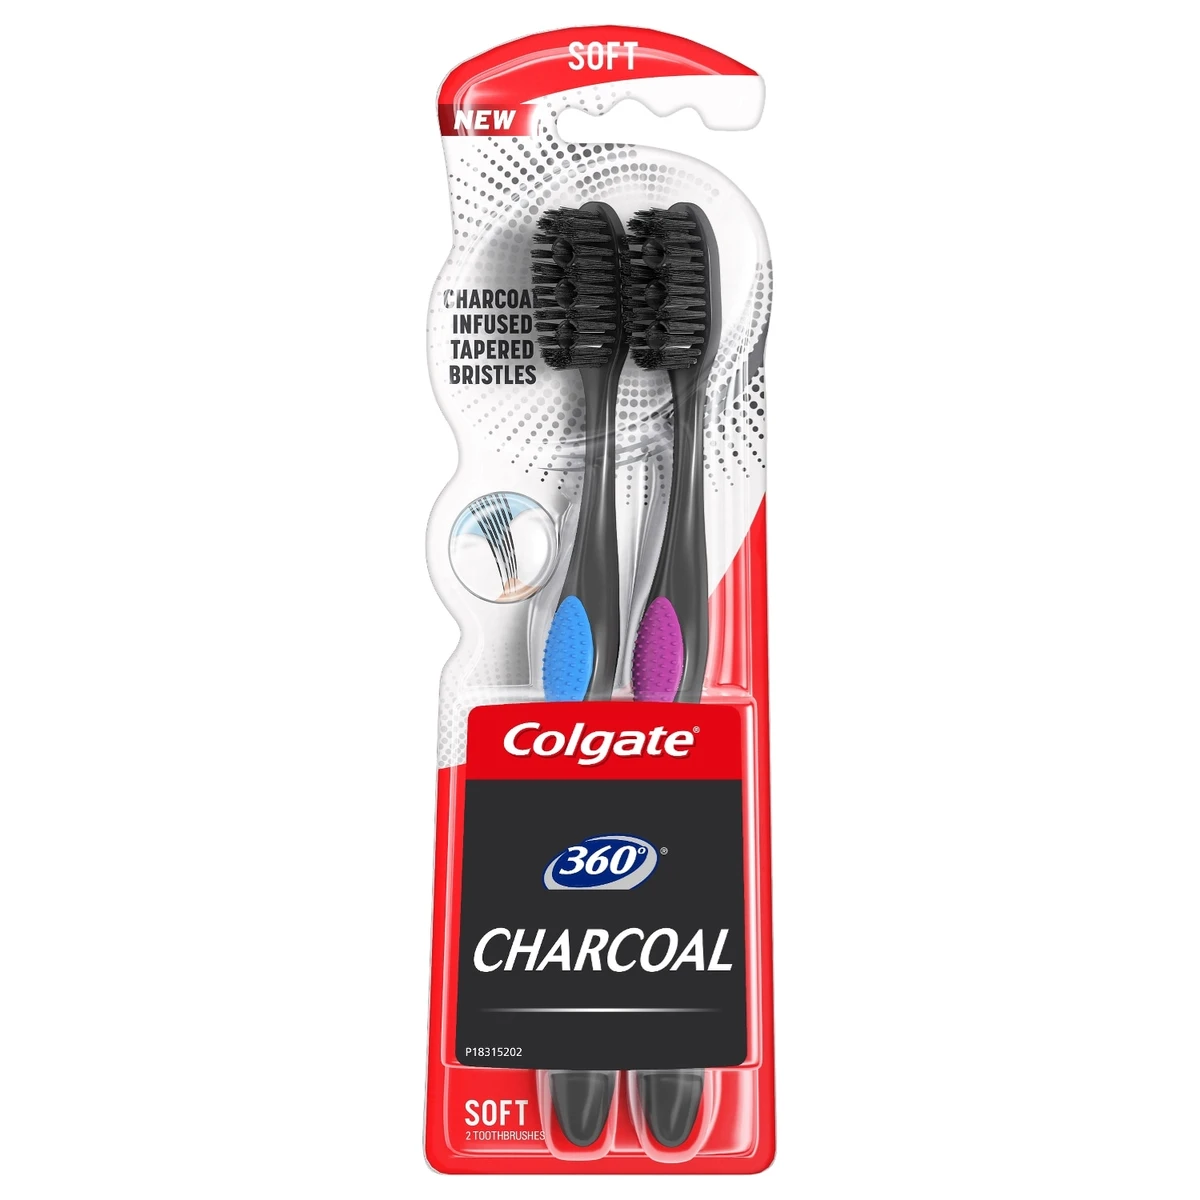 Colgate 360 Manual Charcoal Toothbrush with Tongue & Cheek Cleaner Soft Bristles 2ct